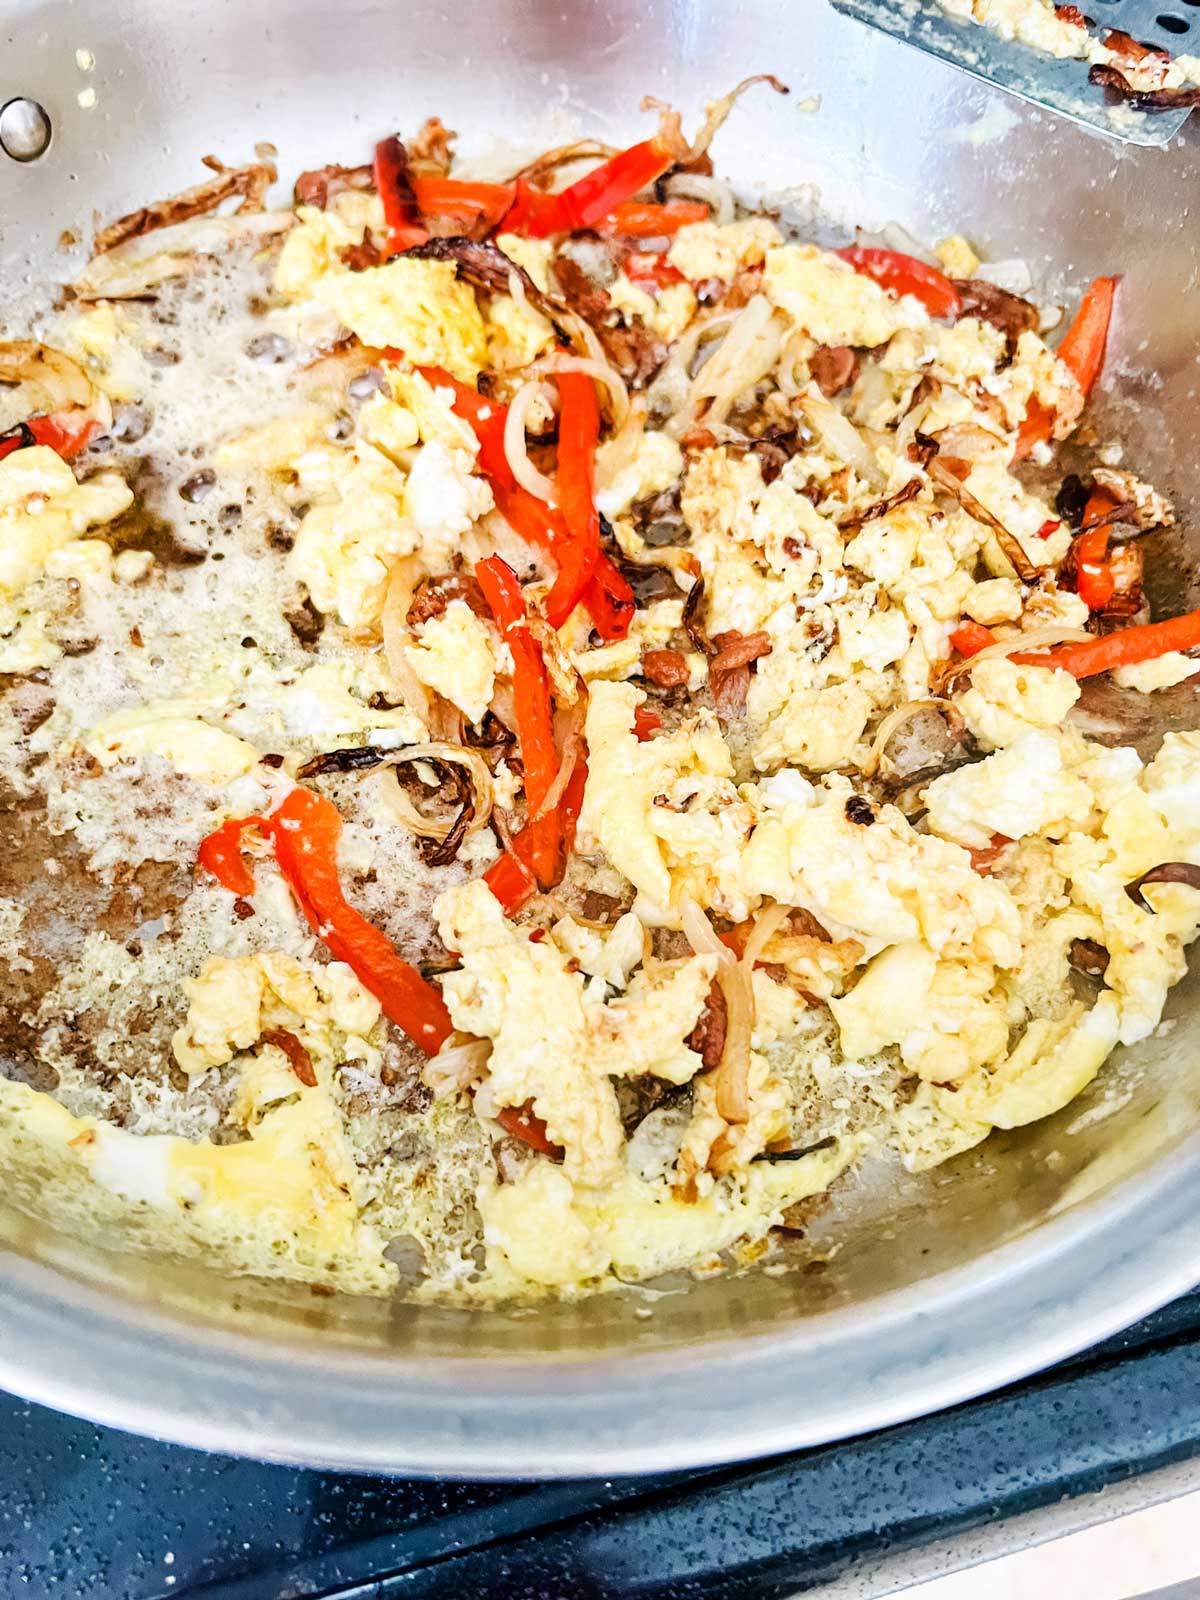 Onion, pepper, and eggs in a skillet.